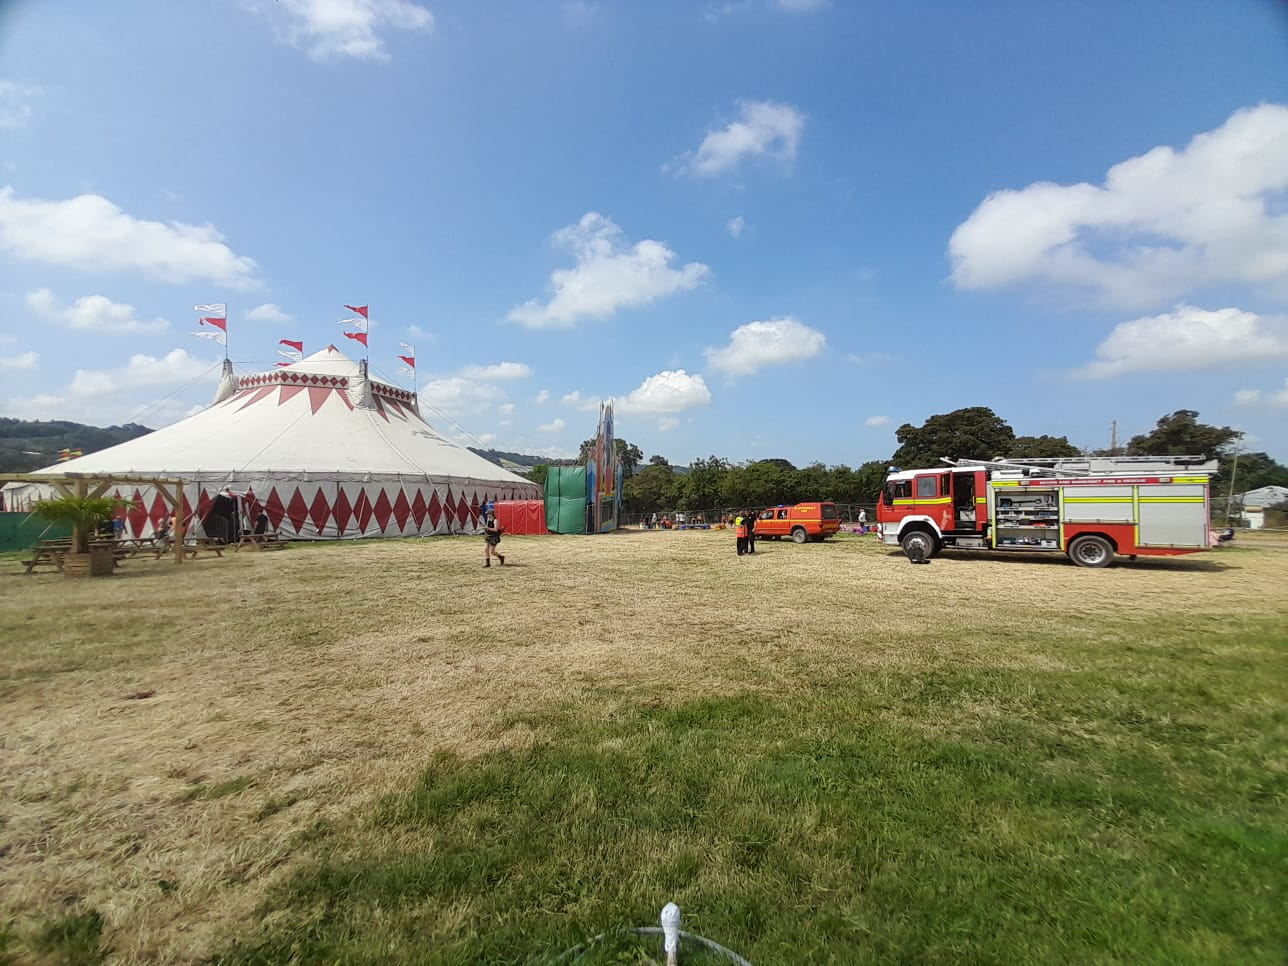 A fire engine near a circus tent at Glastonbury Festival